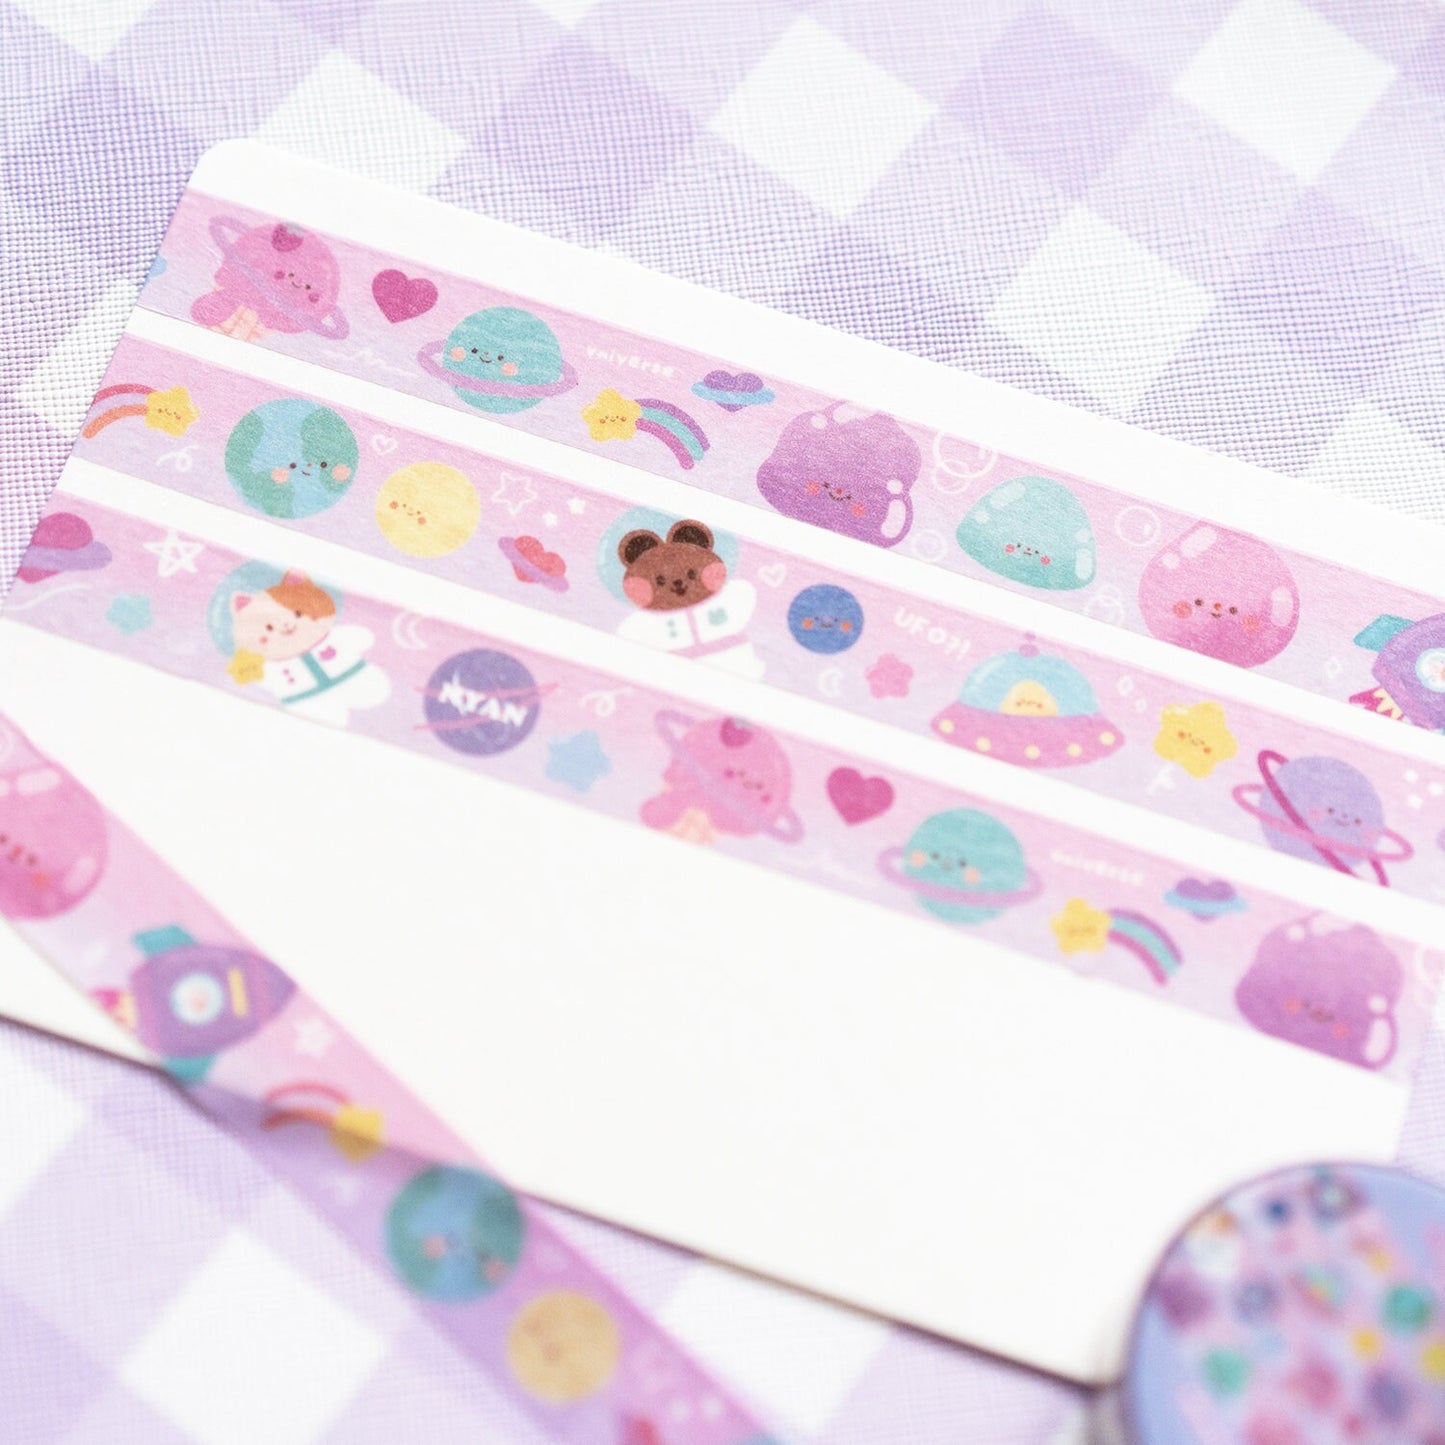 My Universe Space Theme Washi Tape by mintymentaiko